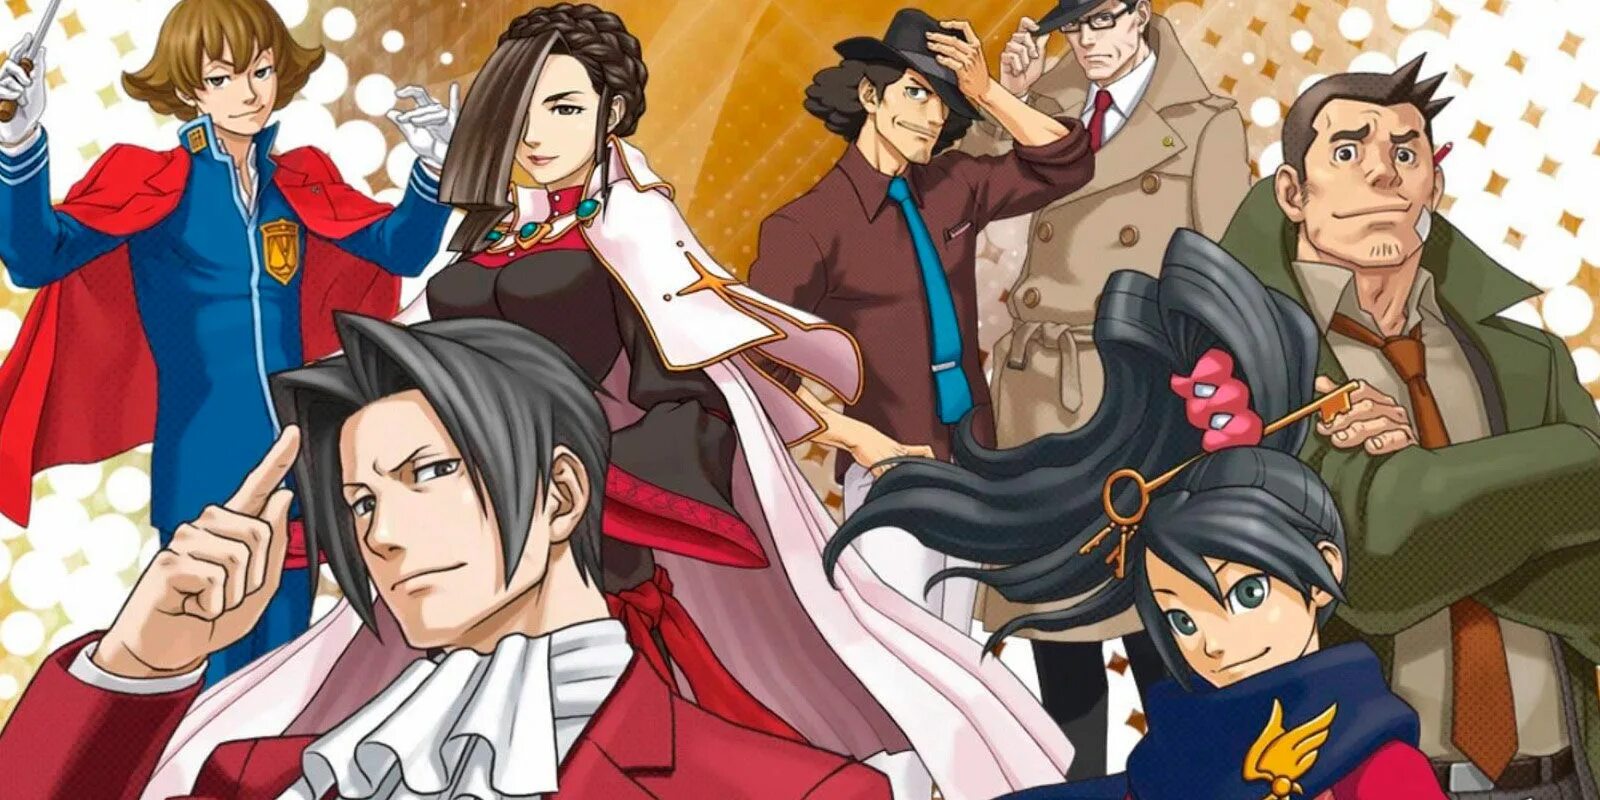 Ace attorney investigations 2. Ace attorney investigations. Miles Edgeworth. Miles Edgeworth investigations. Ace attorney miles edgeworth